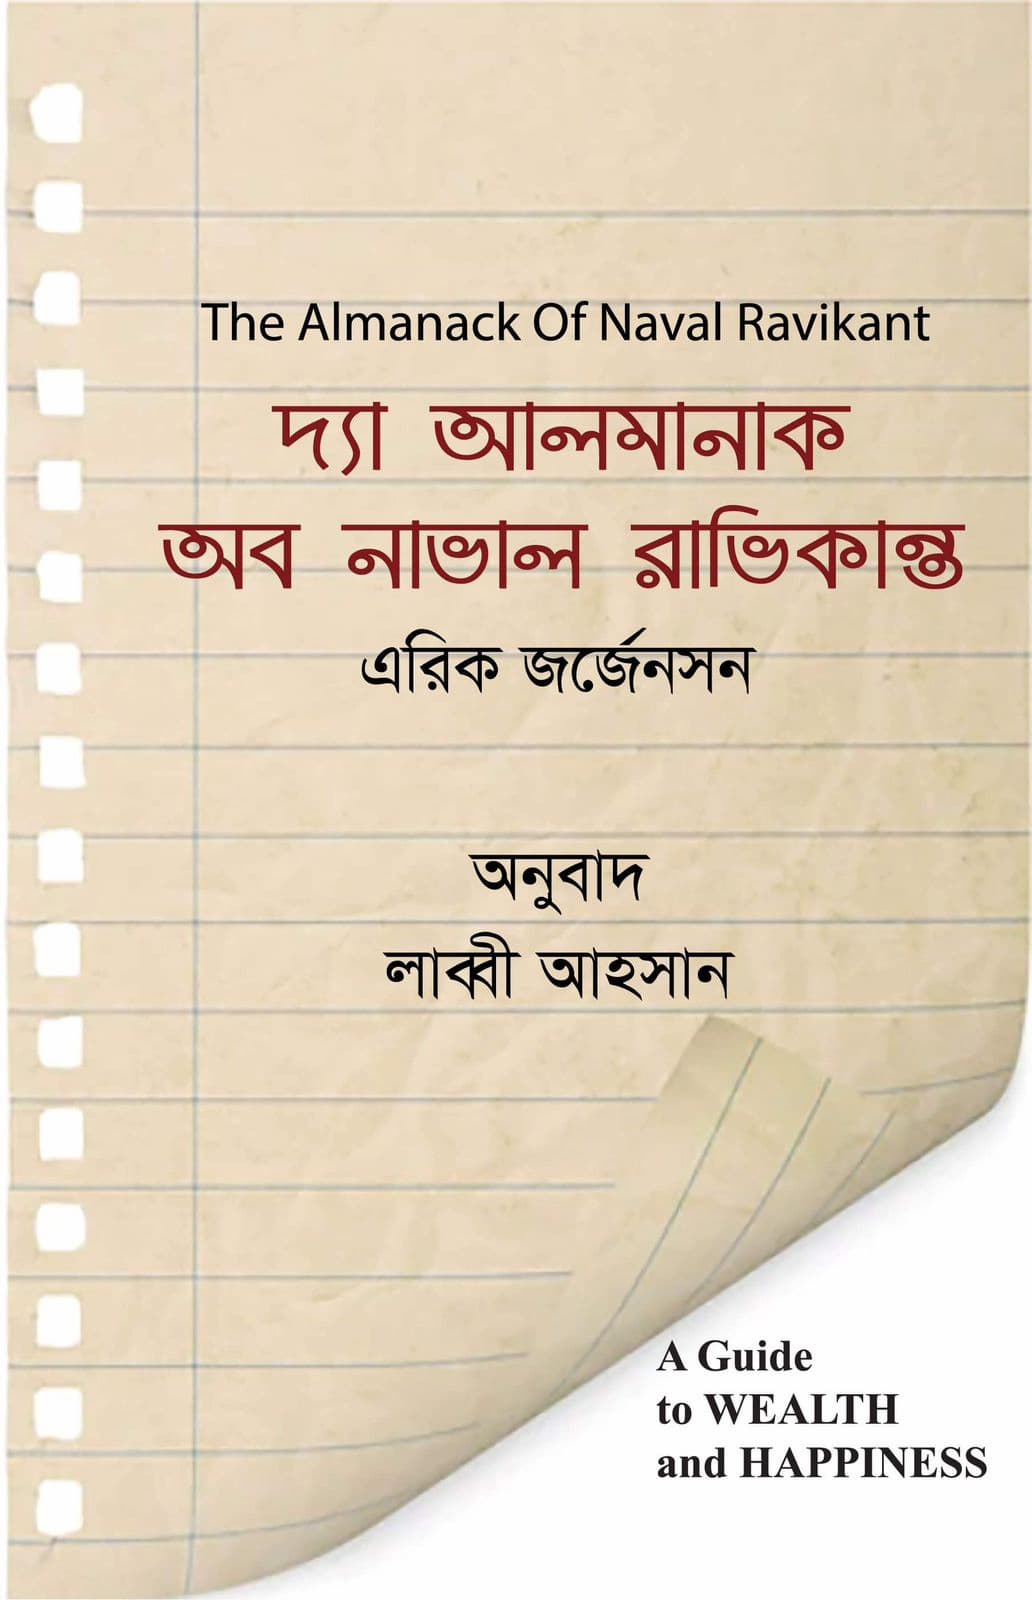 Cover page of The Almanac of Naval Ravikant book